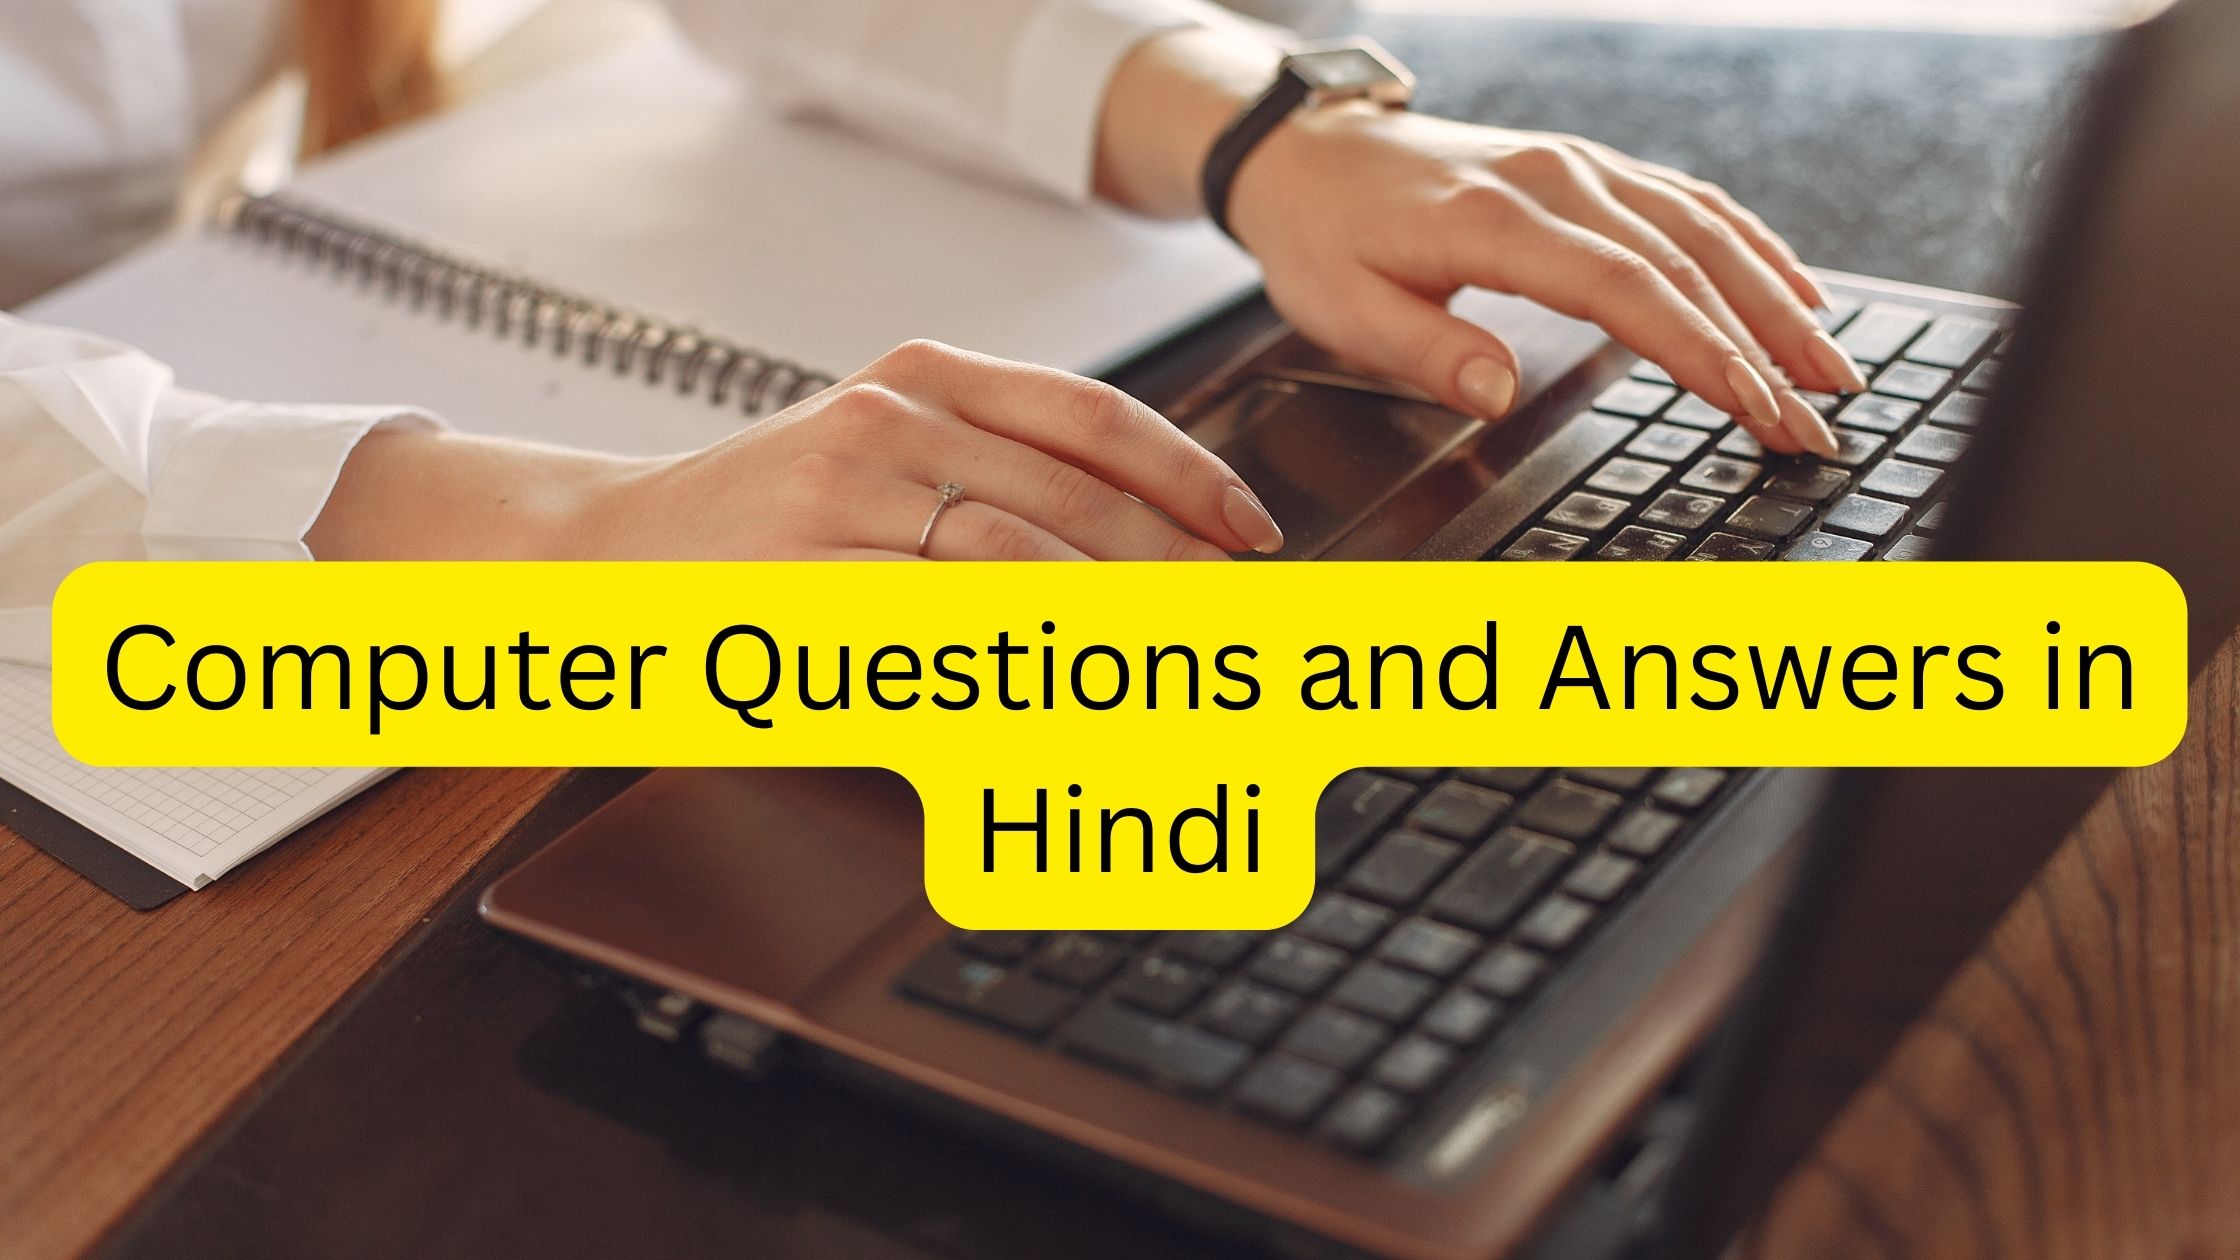 100+ Computer Questions and Answers in Hindi (100+ कंप्यूटर सवाल और उत्तर)